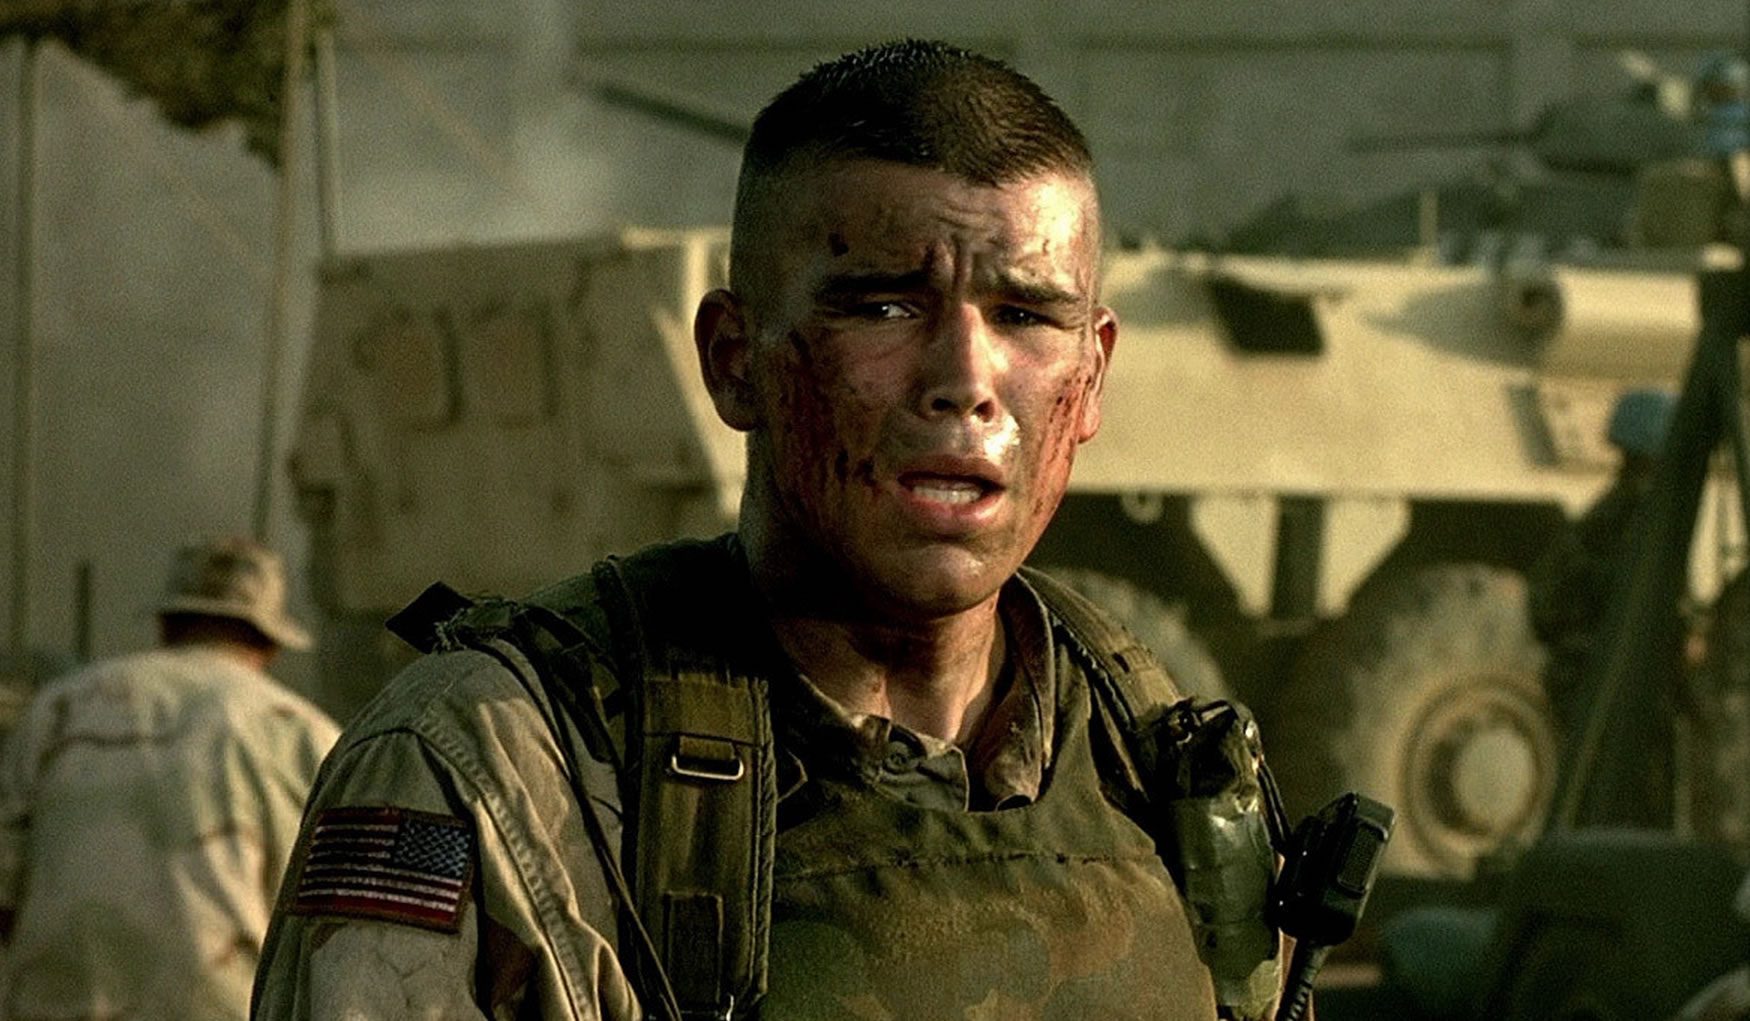 Timeless Military Haircuts That Suit Every Man